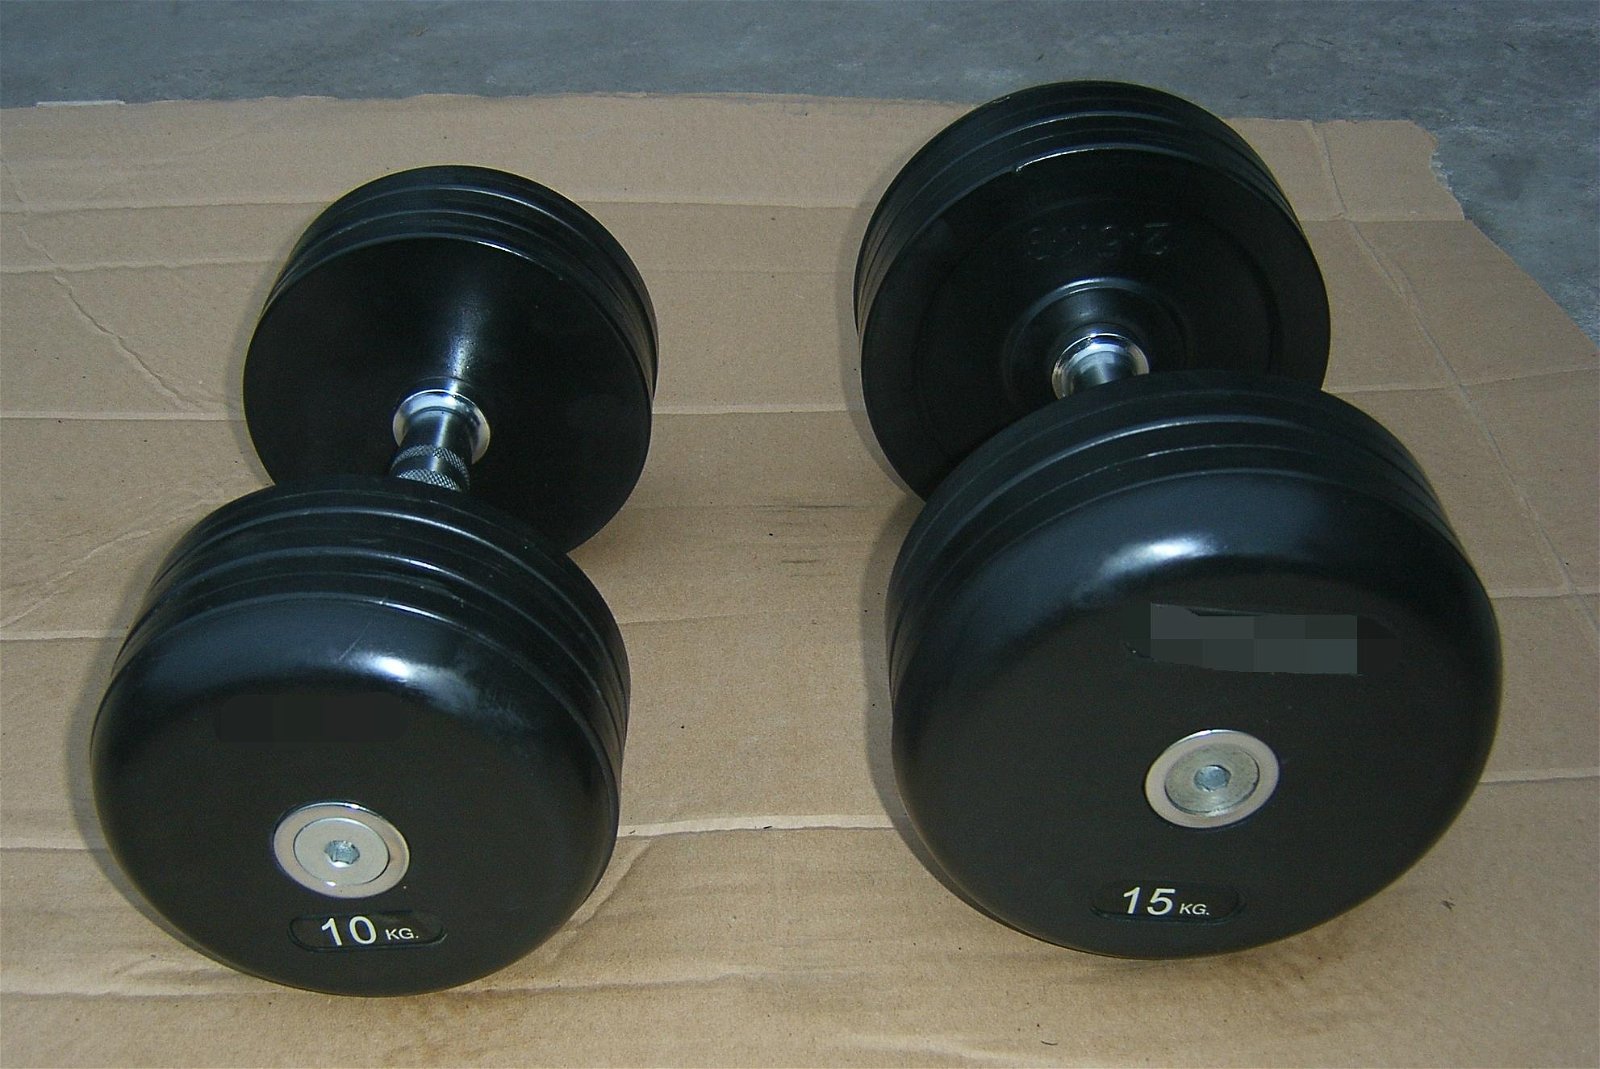 SDH Square Rubber plate dumbbell with high quality